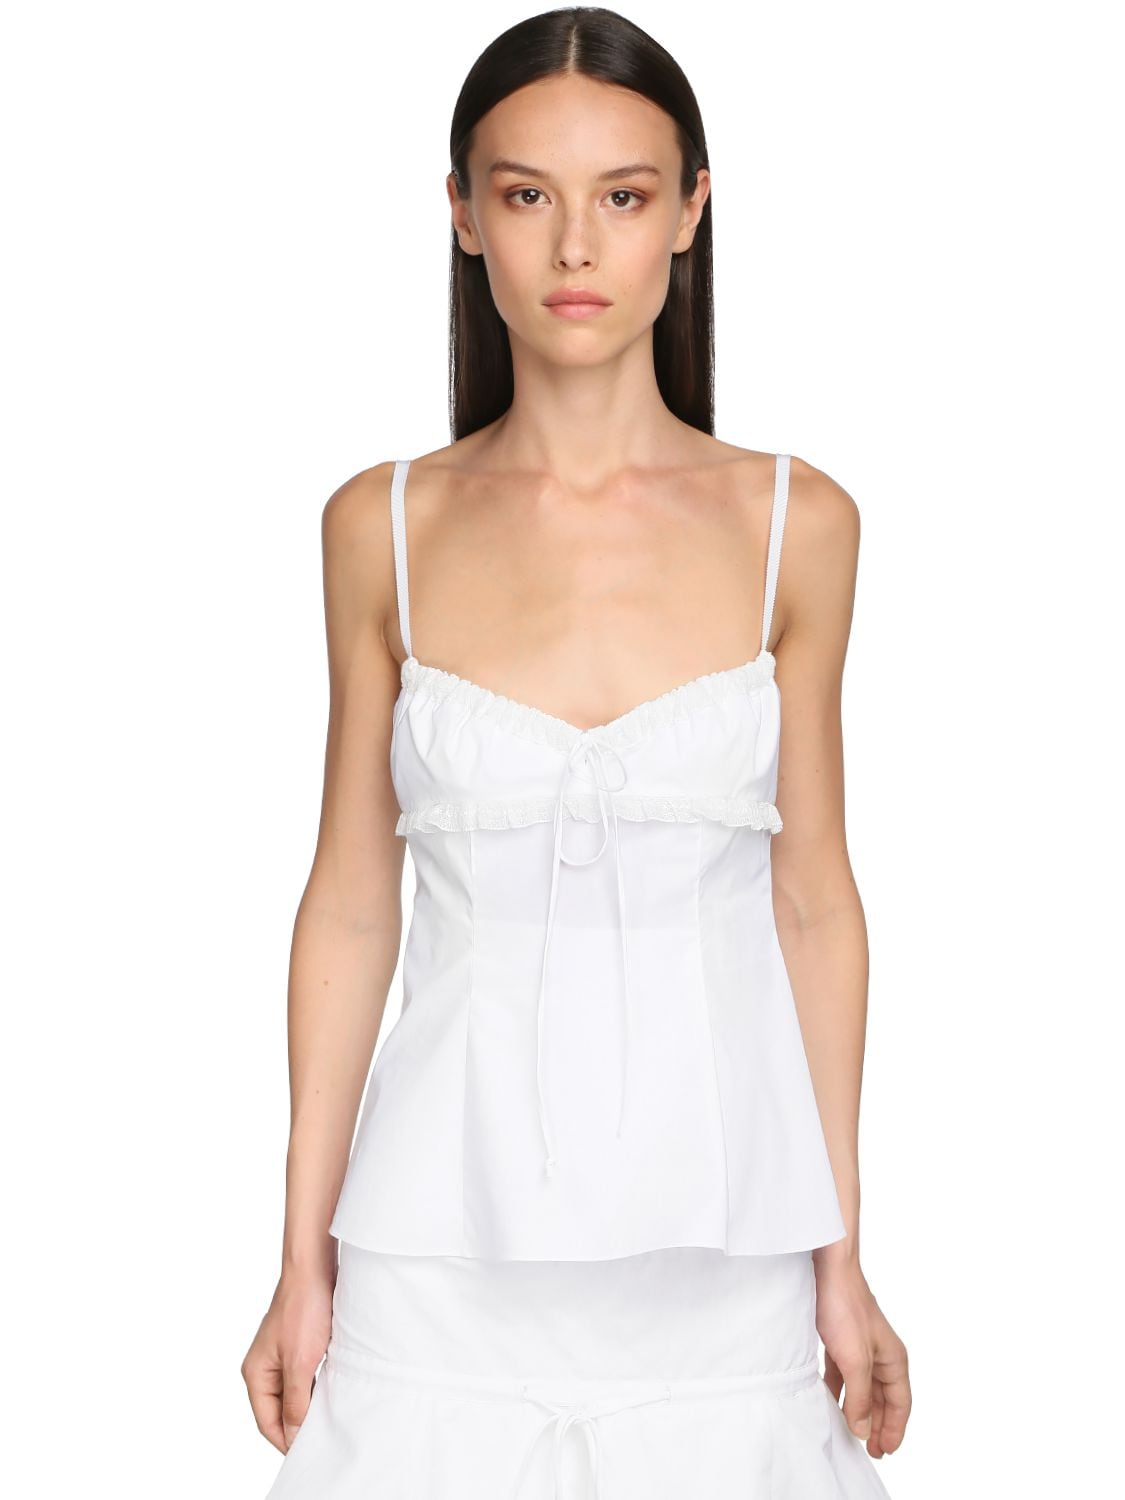 BROCK COLLECTION COTTON BLEND CAMISOLE TOP W/ LACE,71I5V4015-MTAW0